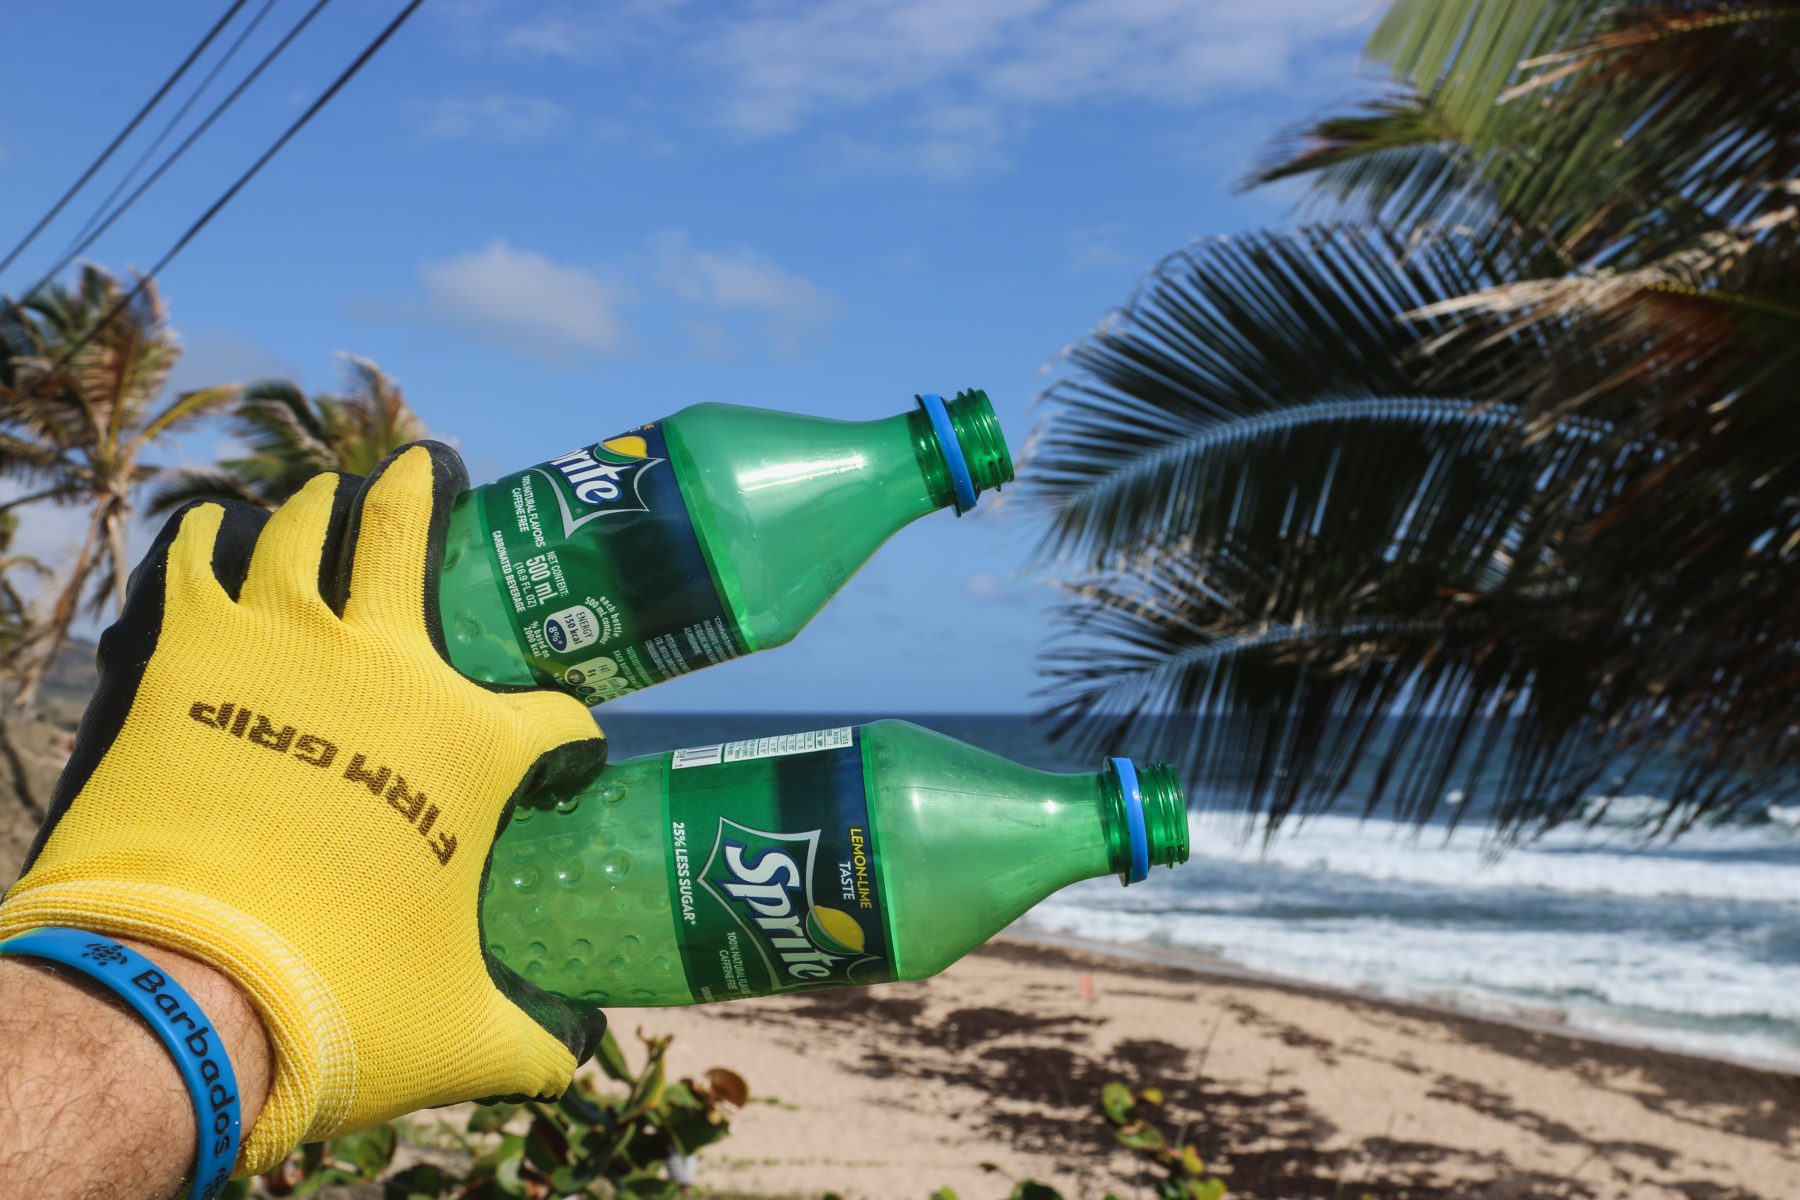 A pair of single use plastic bottles found during a beach cleanup in Barbados.